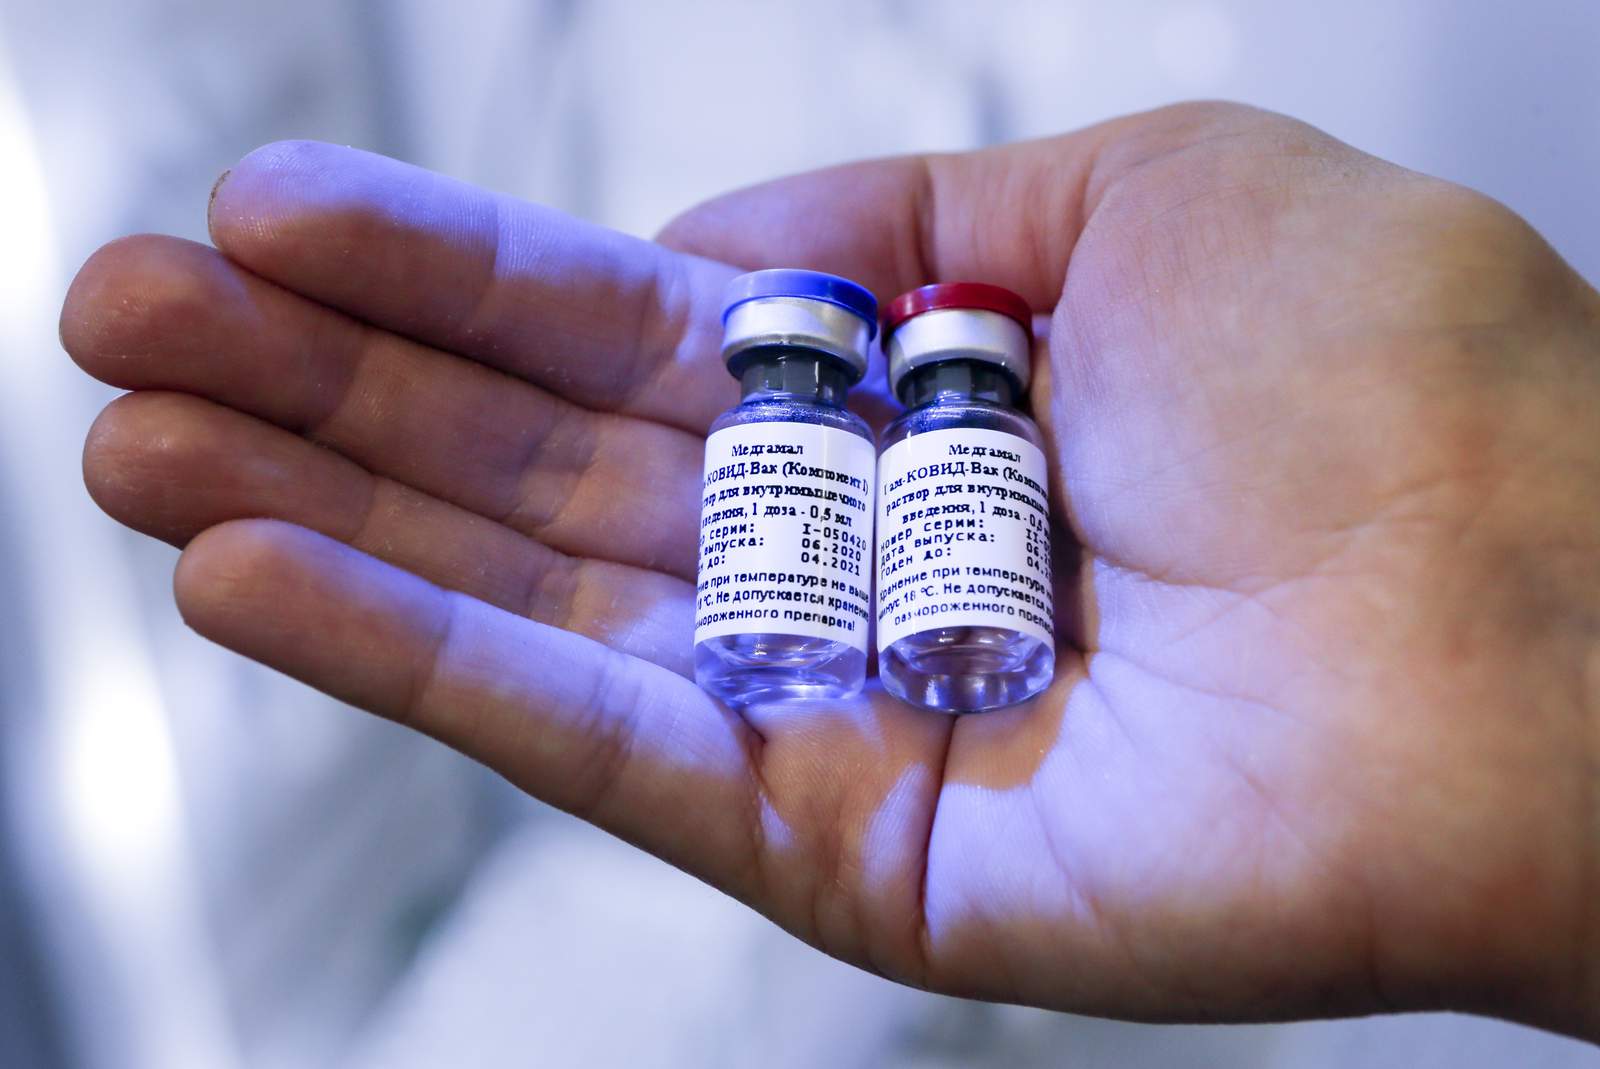 Russia publishes virus vaccine results, weeks after approval